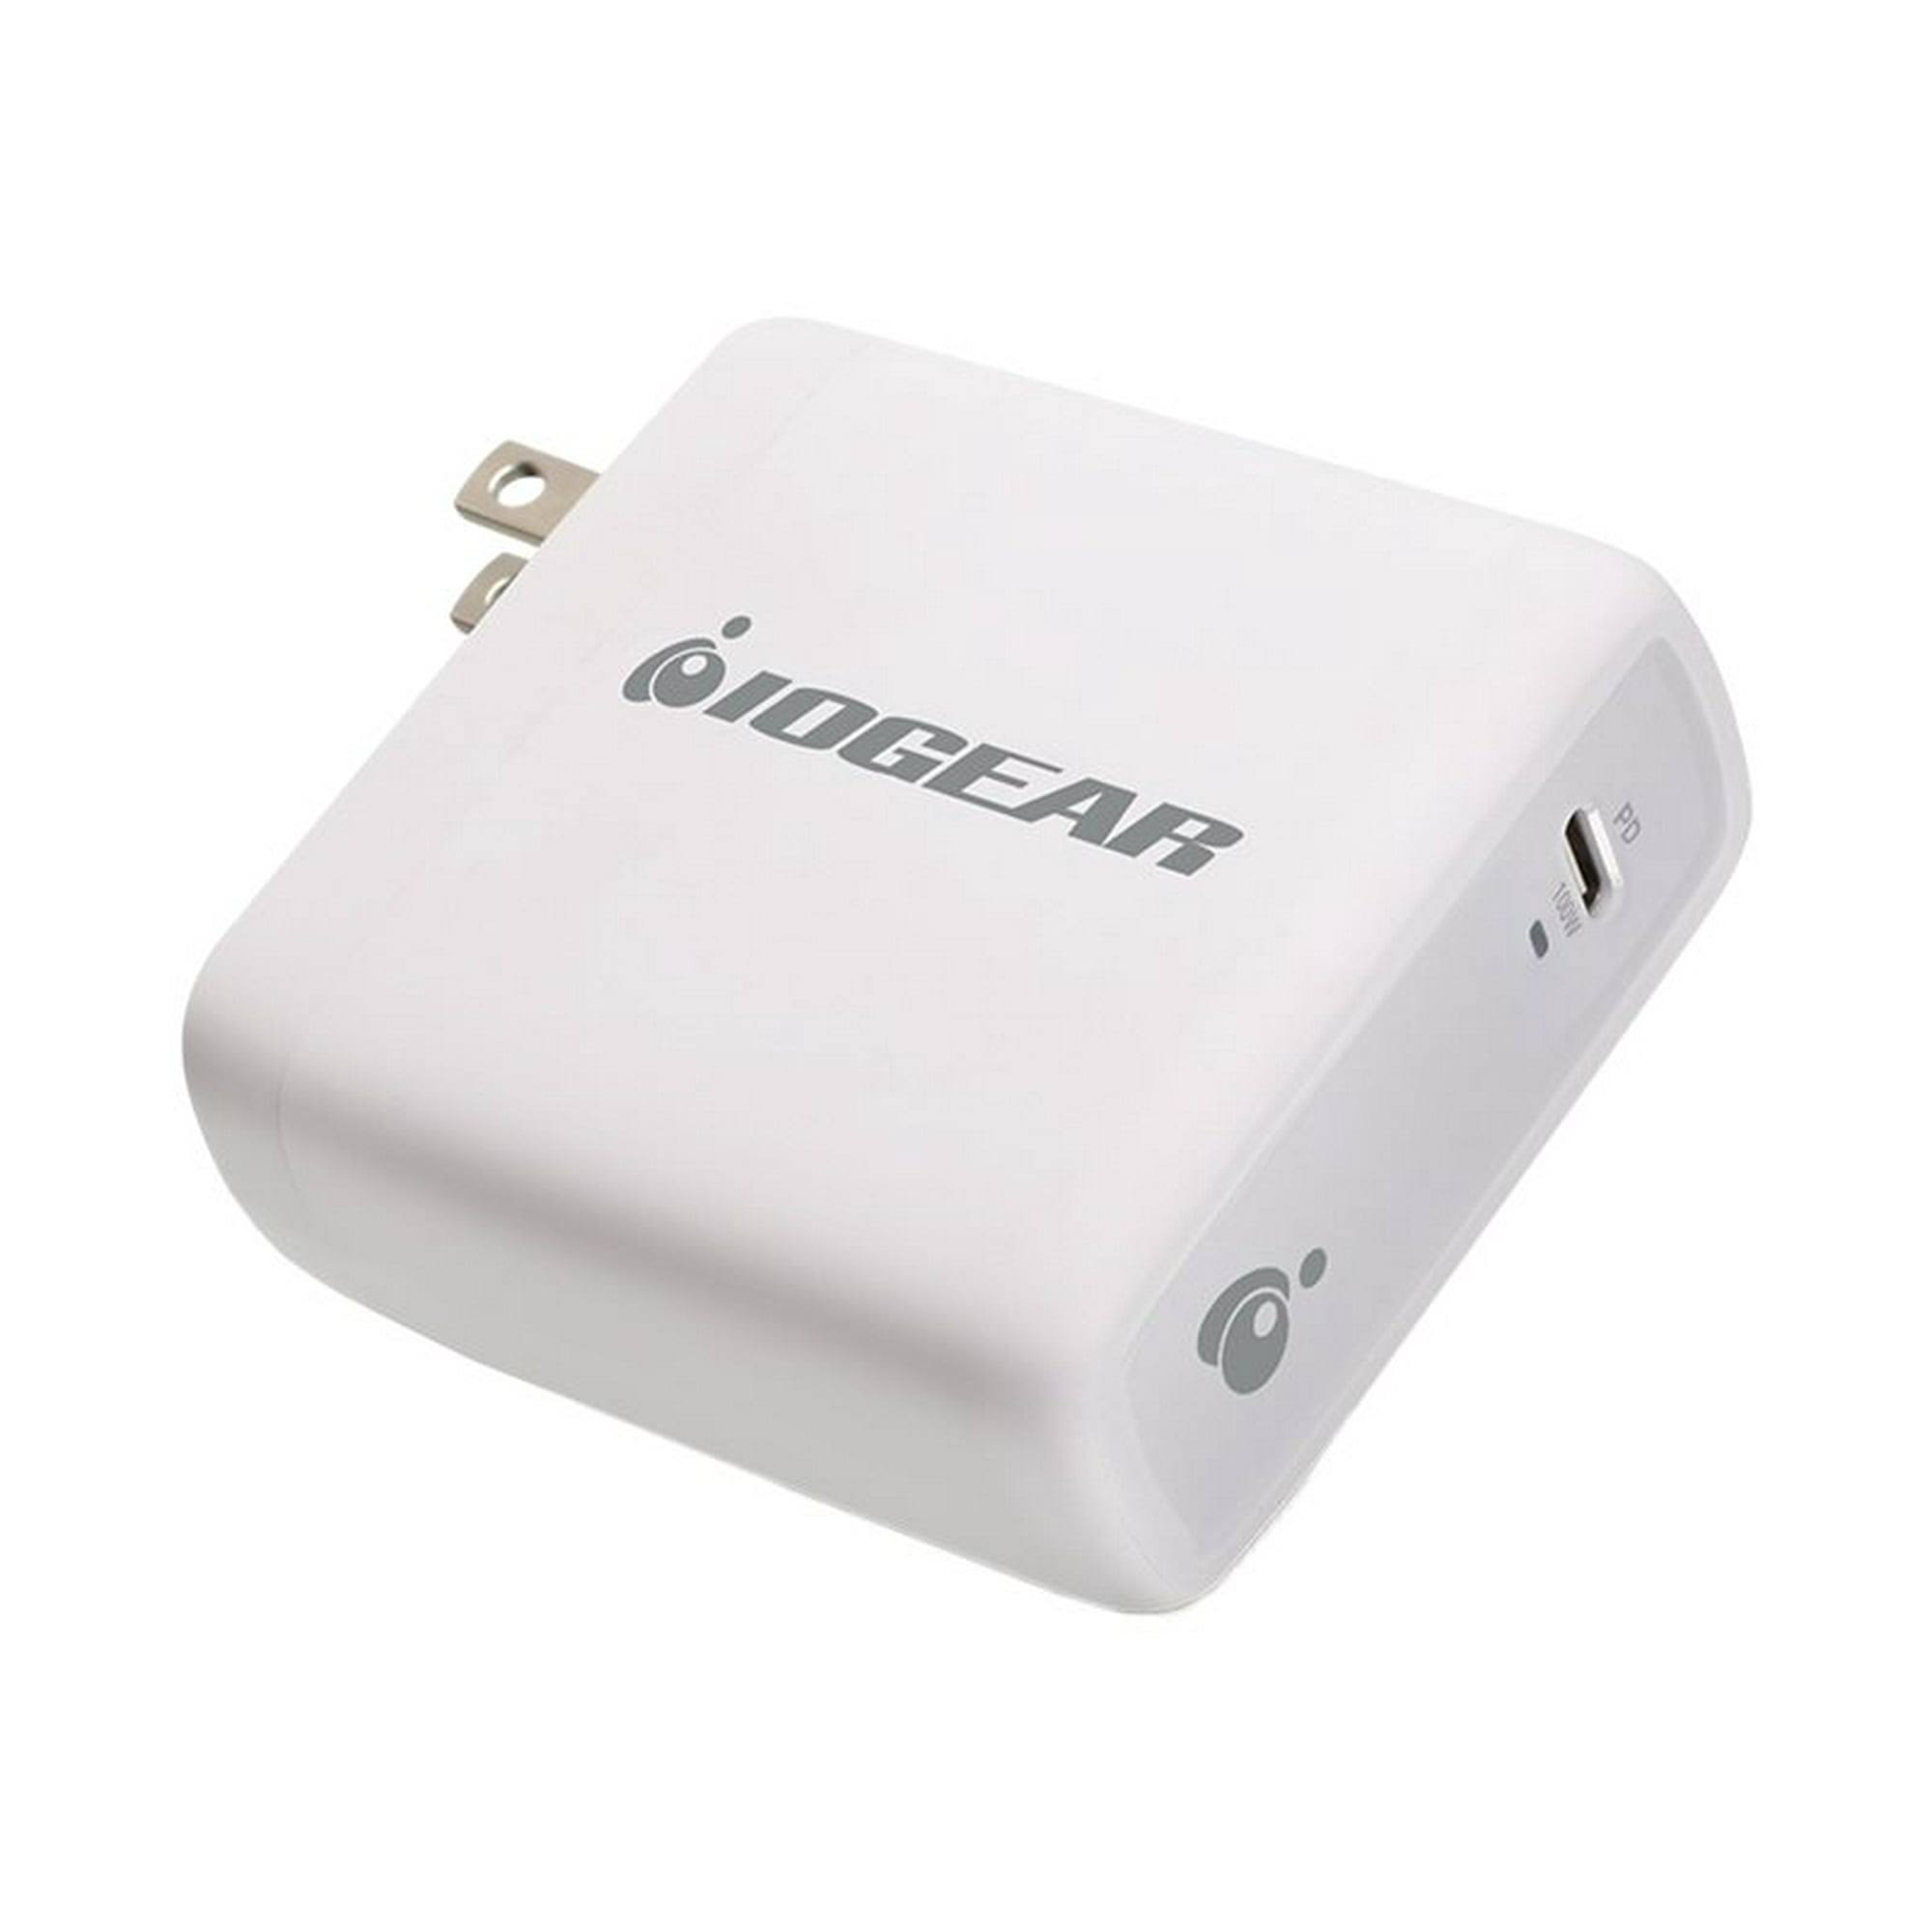 IOGEAR GearPower 100W USB Type-C GaN Charger, C, Plug 2 prong, Total Amps 5A, 1, Power Delivery, Color White